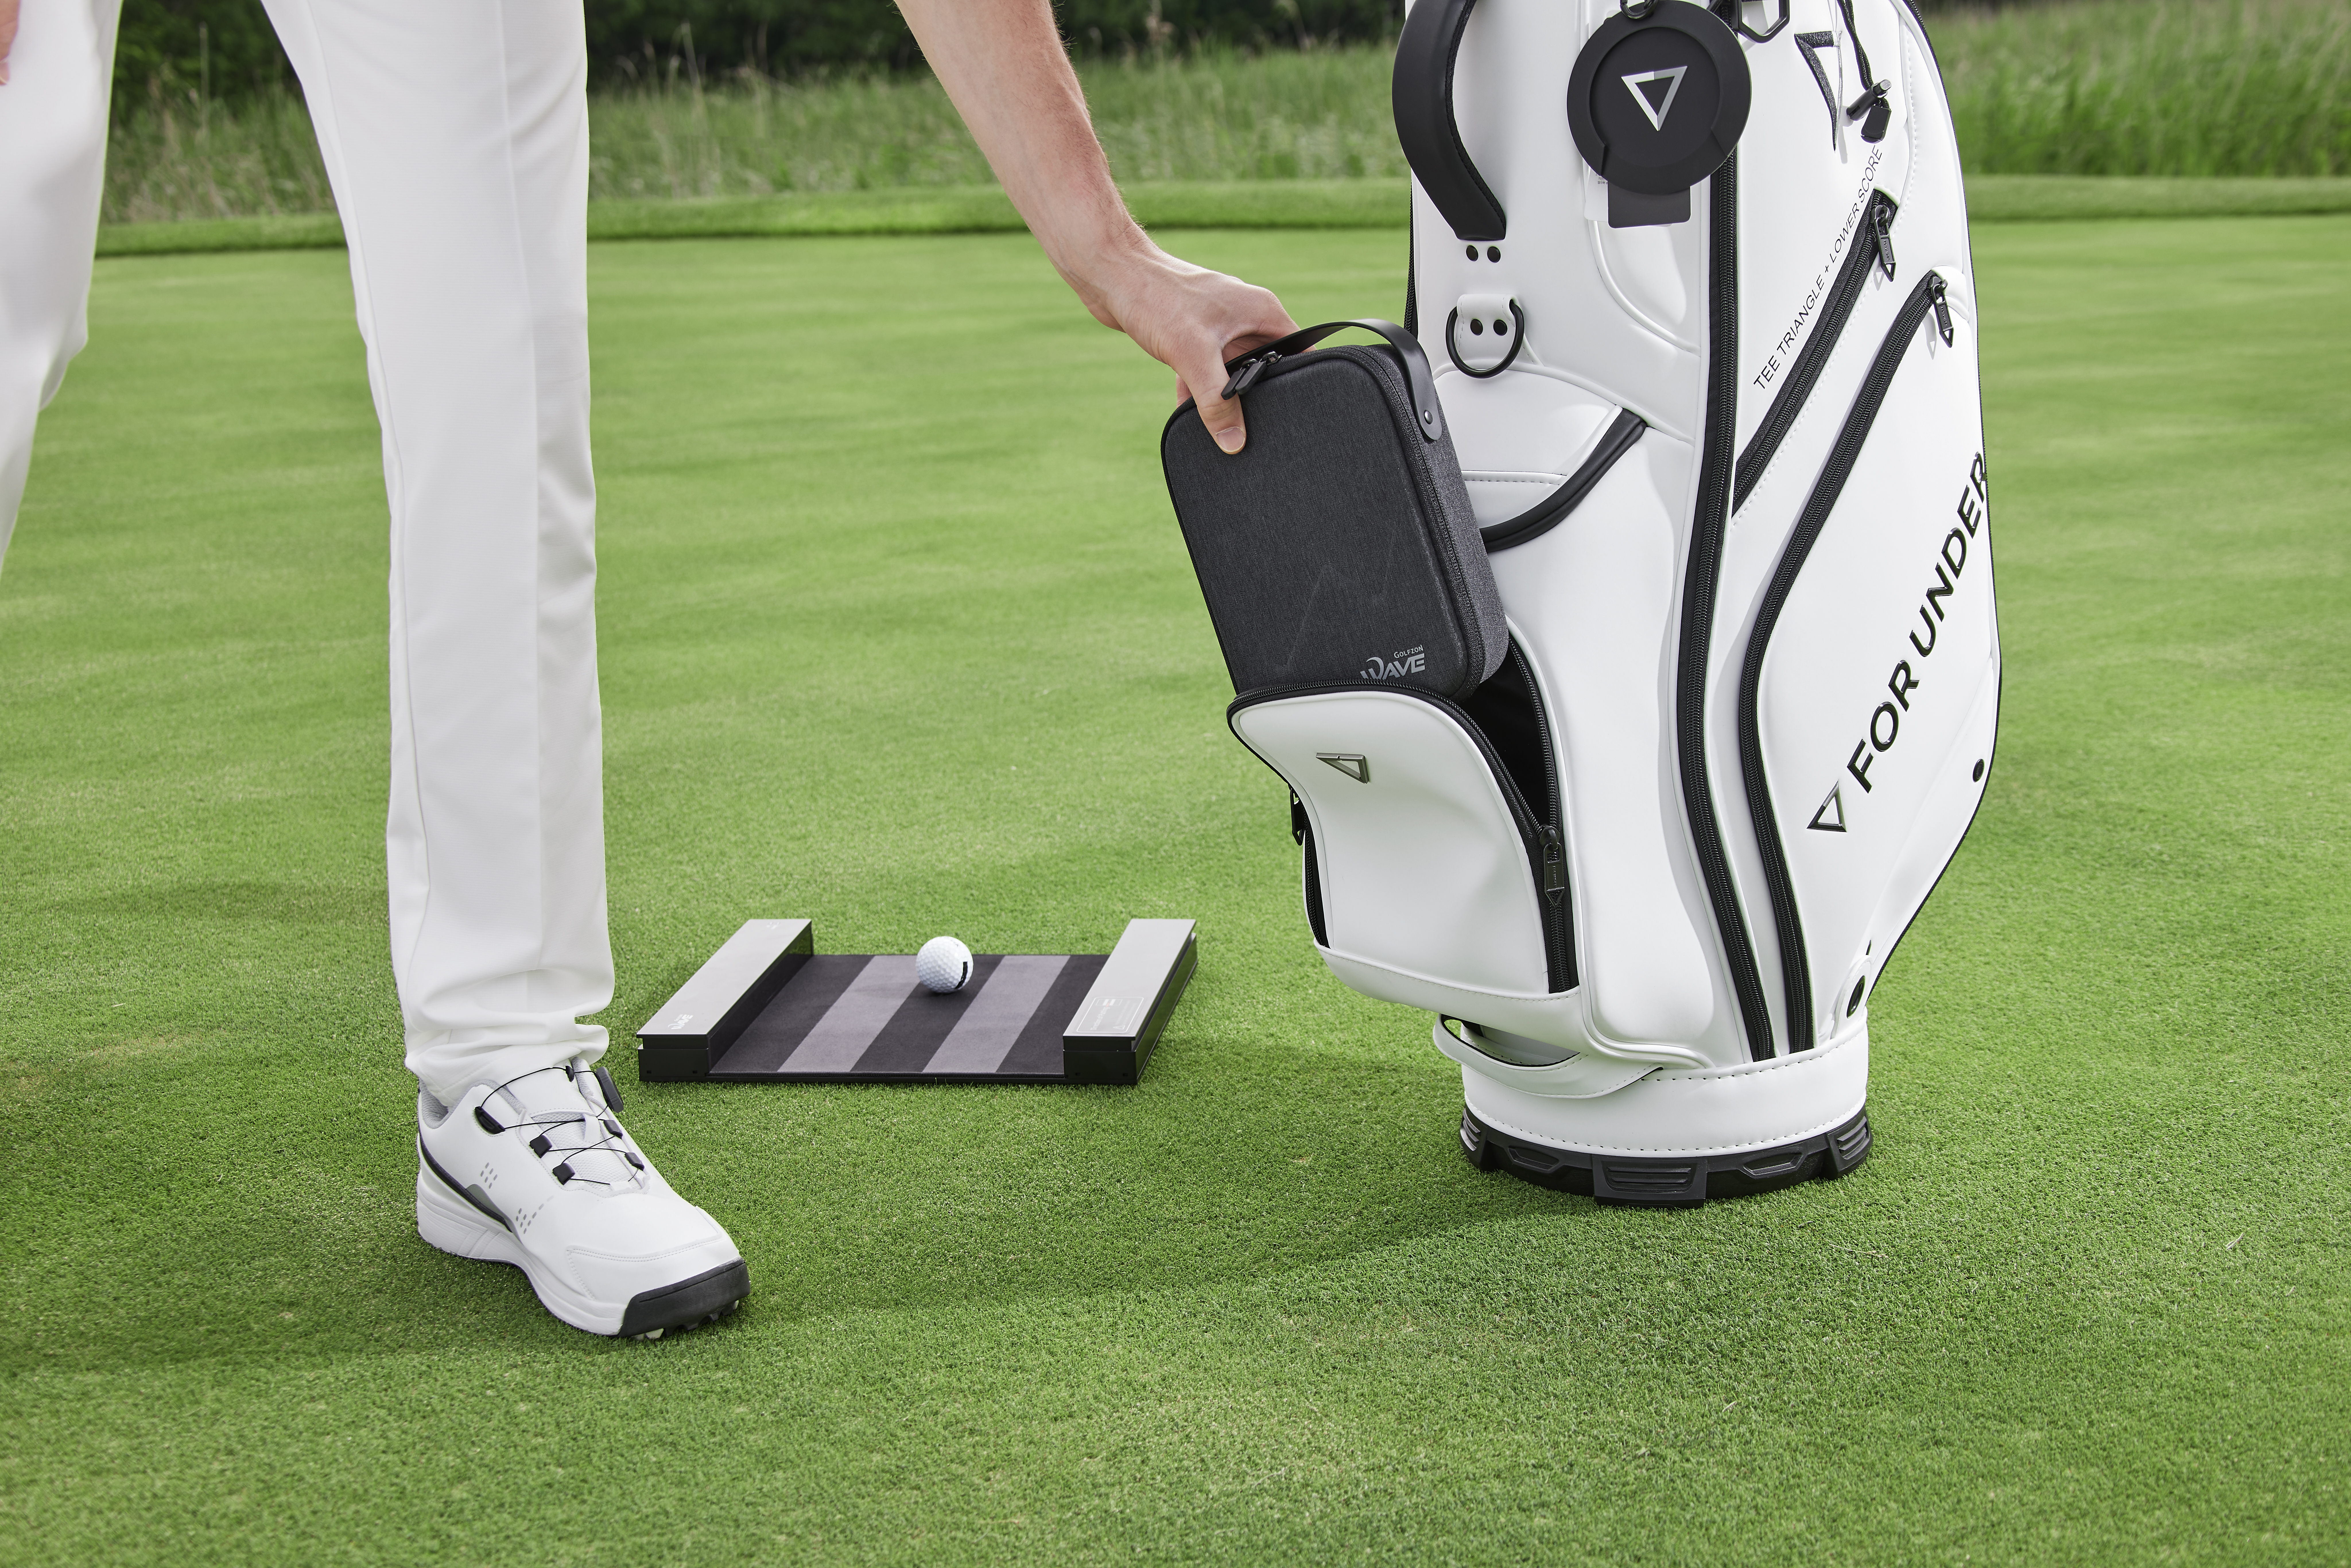 Portable Launch Monitor: Golfzon Wave that fits in your golf bag